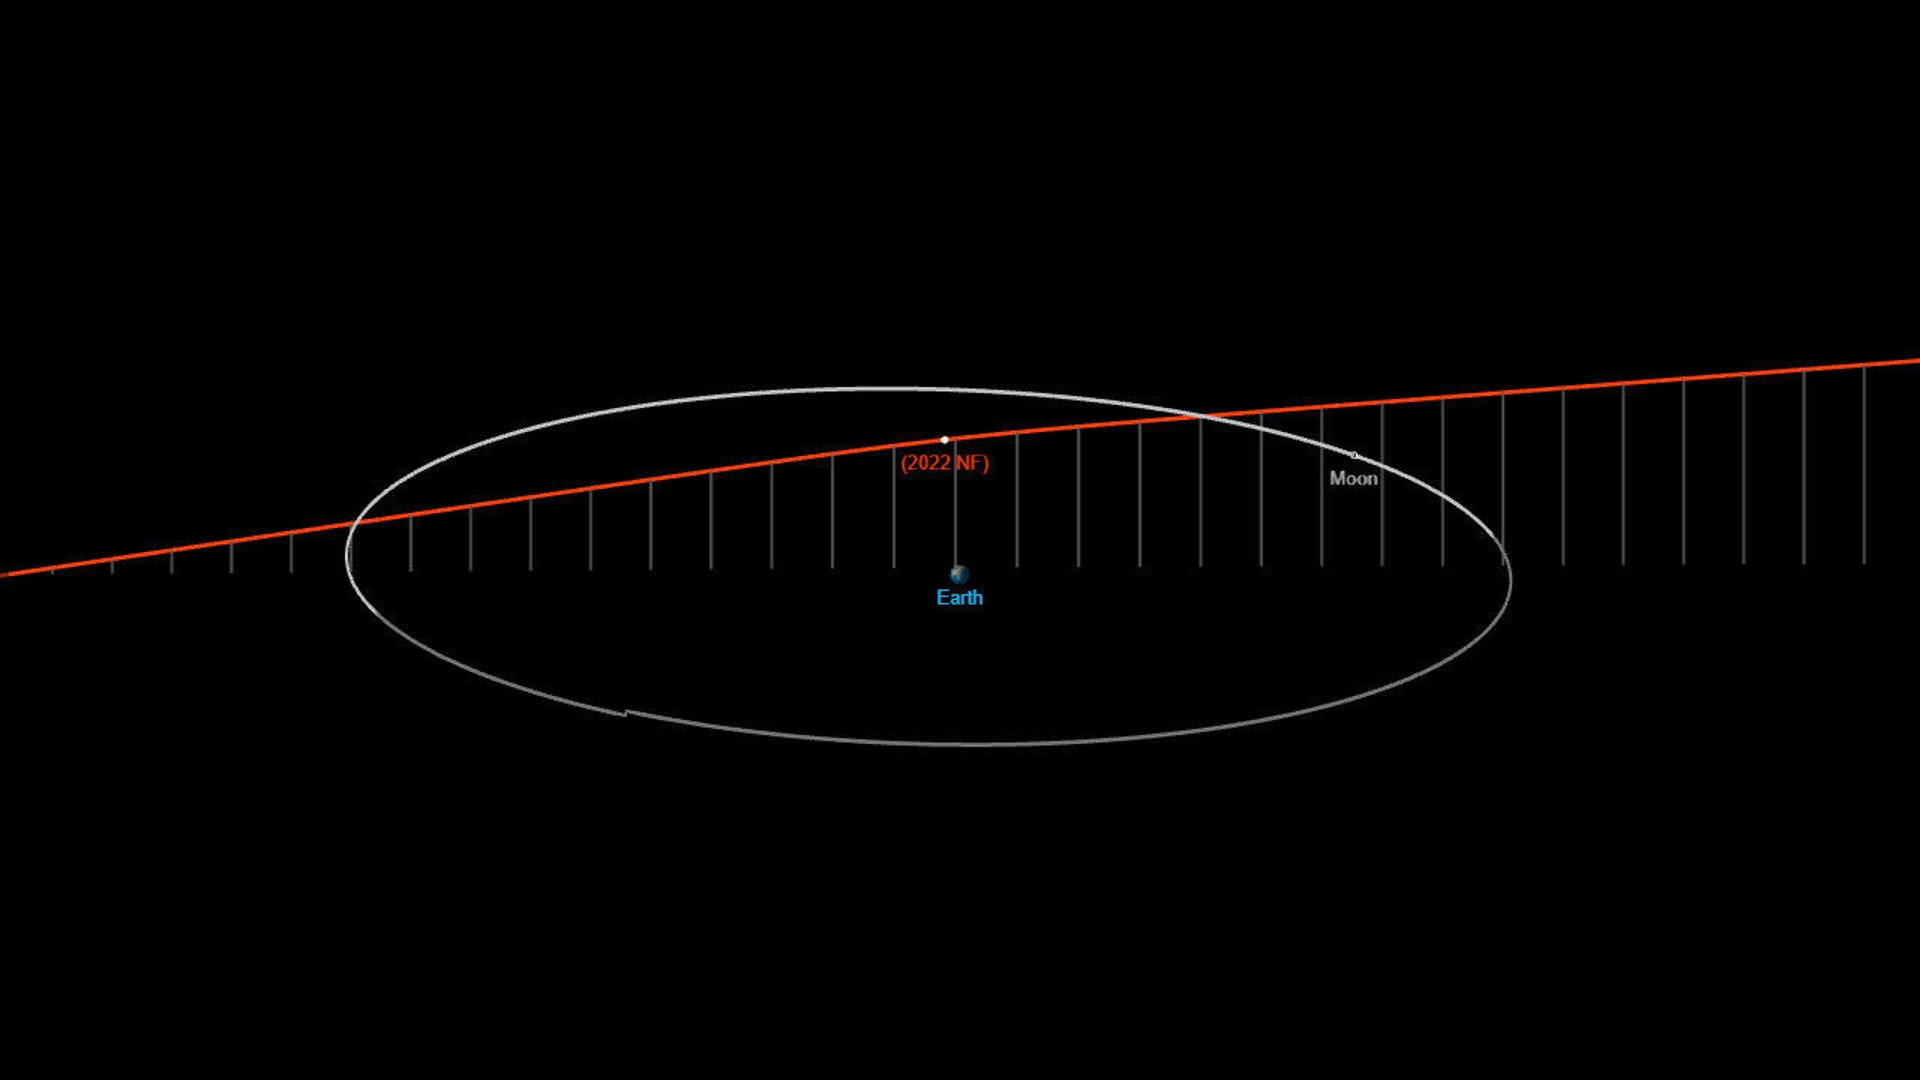 Chart shows Earth in the middle, the orbit of the moon as a line in gray and the path of asteroid 2022 NF in red.